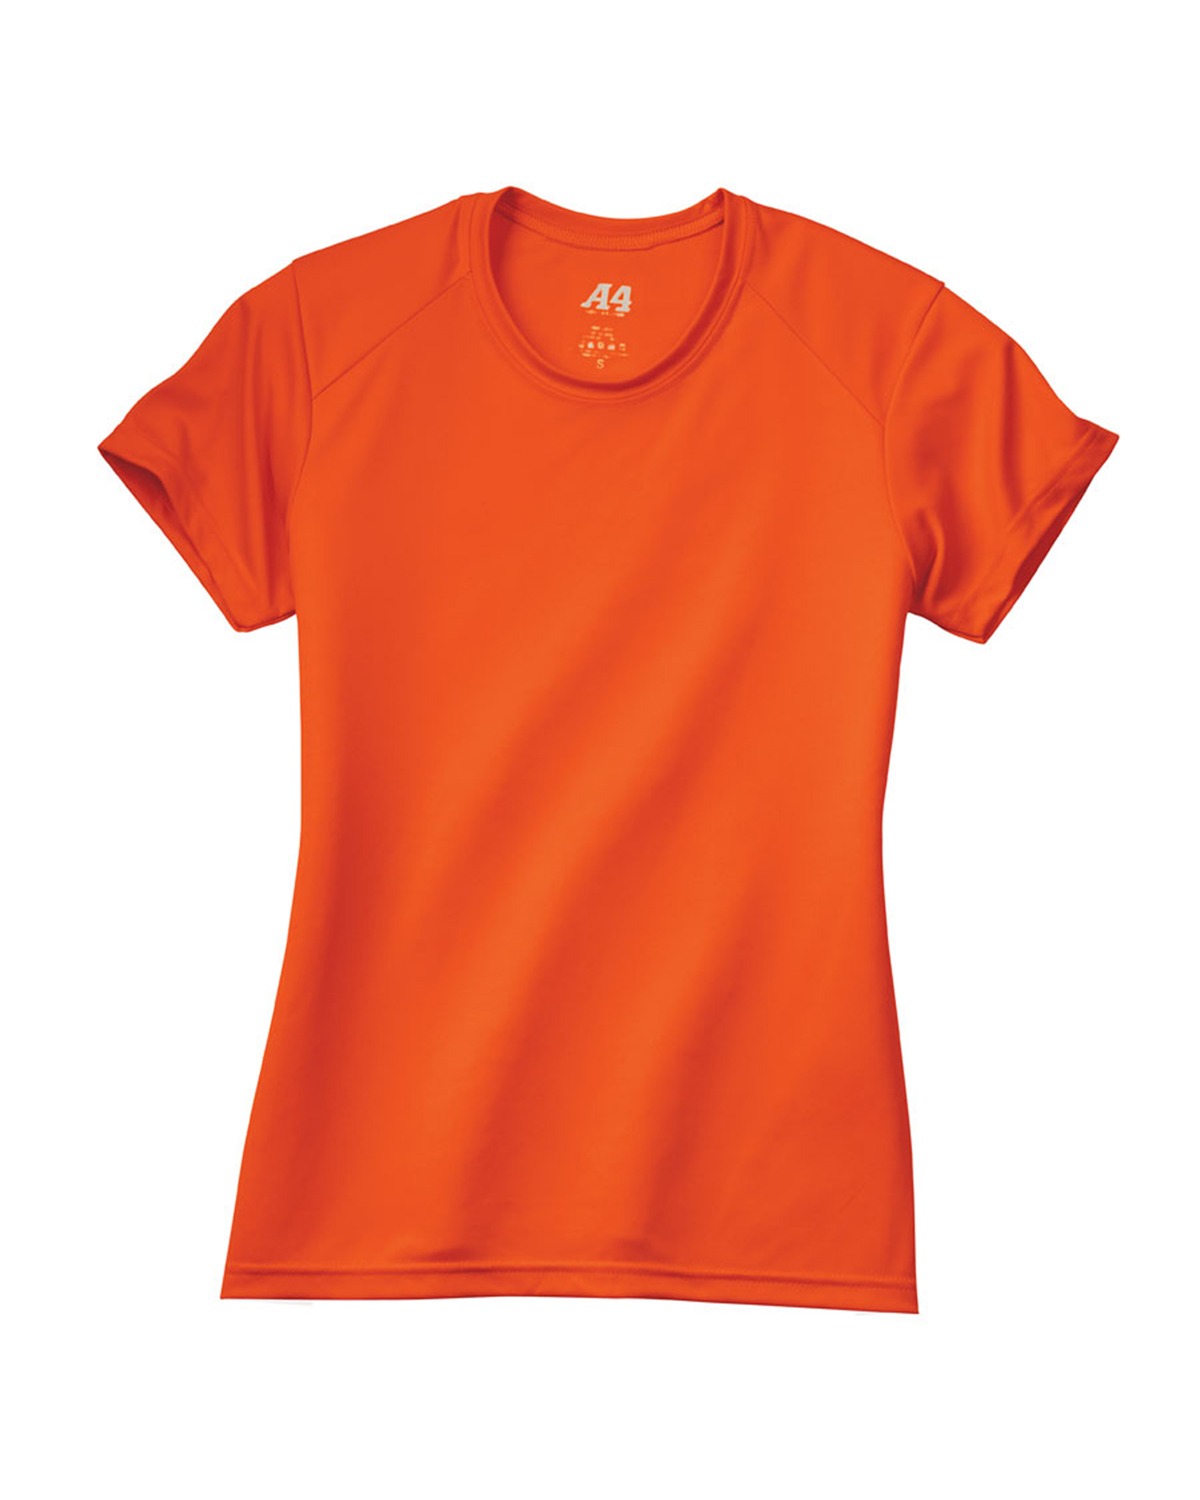 A4 NW3201 - Ladies' Cooling Performance Tee